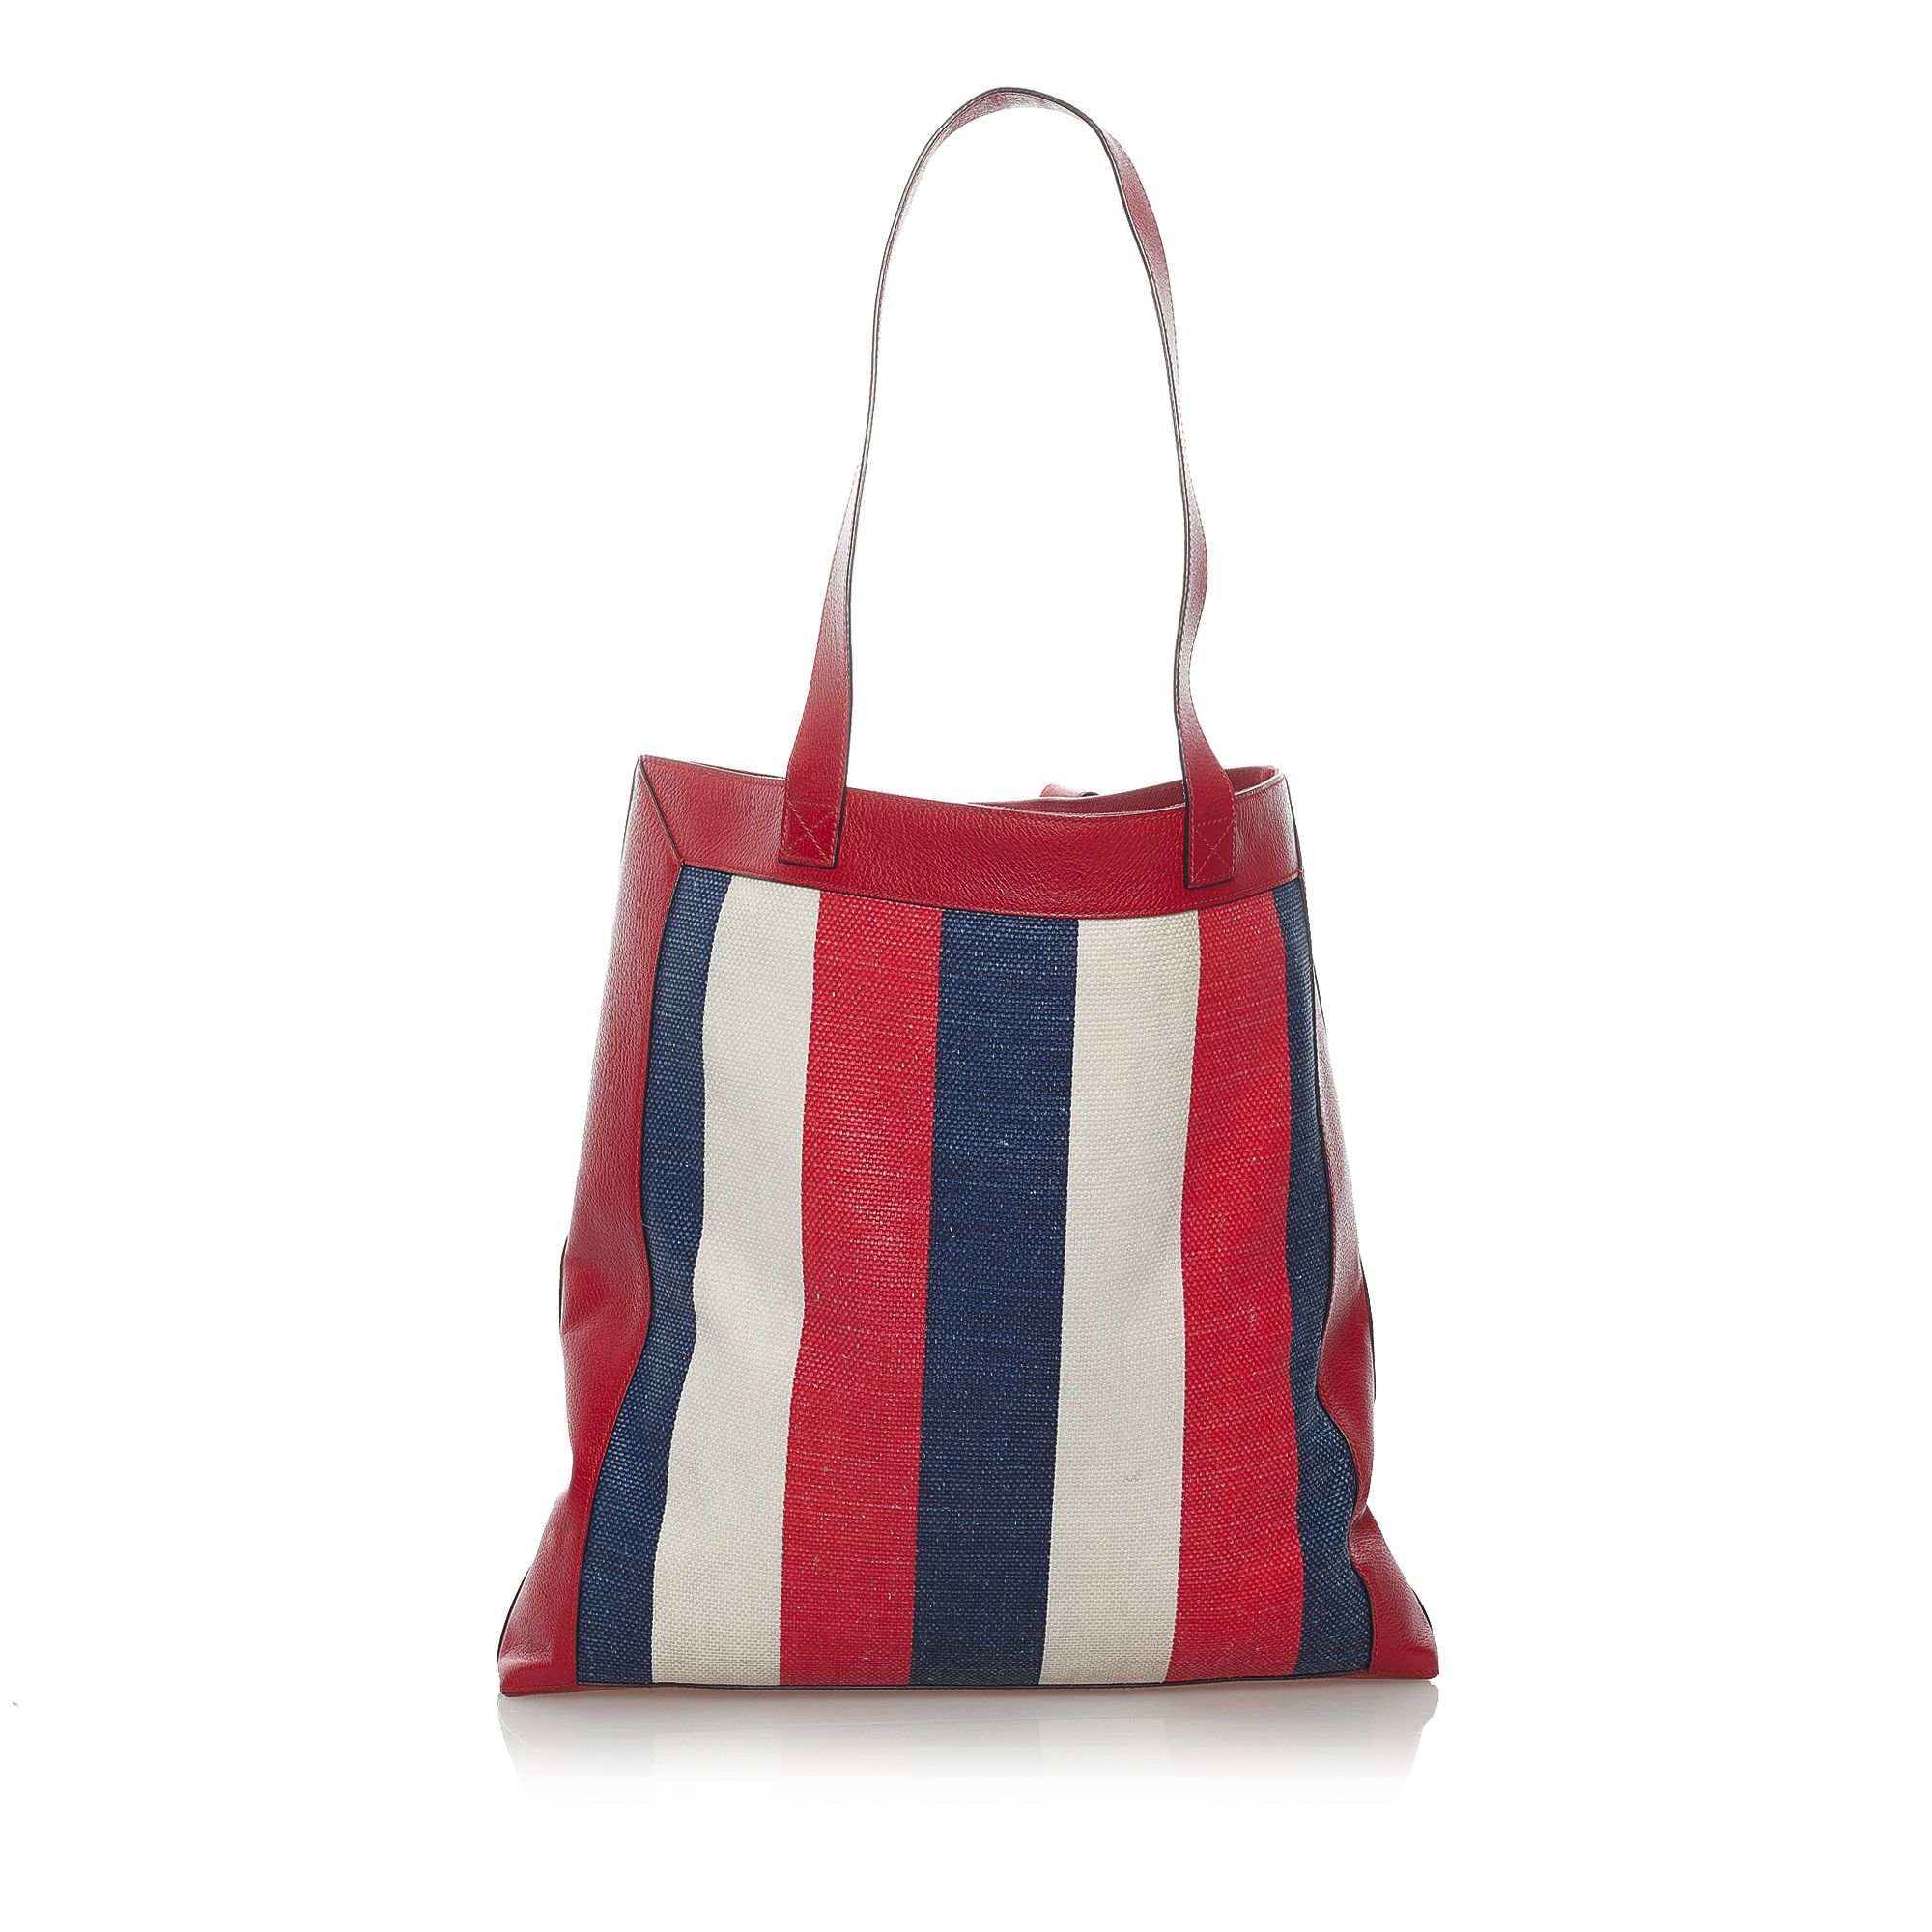 VINTAGE. RRP AS NEW. The 2018 Logo Striped tote bag features a printed canvas body with leather trim, a flat leather straps, an open top, and an interior zip pocket.Exterior back is discolored, out of shape and scratched. Exterior bottom is out of shape. Exterior corners is scratched. Exterior front is discolored, out of shape, scratched and stained. Zipper is scratched and tarnished. Interior lining is discolored.

Dimensions:
Length 43cm
Width 40cm
Depth 7cm
Hand Drop 29cm
Shoulder Drop 29cm

Original Accessories: Dust Bag

Serial Number: 523781
Color: Red x Multi
Material: Fabric x Canvas x Leather x Calf
Country of Origin: Italy
Boutique Reference: SSU156728K1342


Product Rating: GoodCondition

Certificate of Authenticity is available upon request with no extra fee required. Please contact our customer service team.